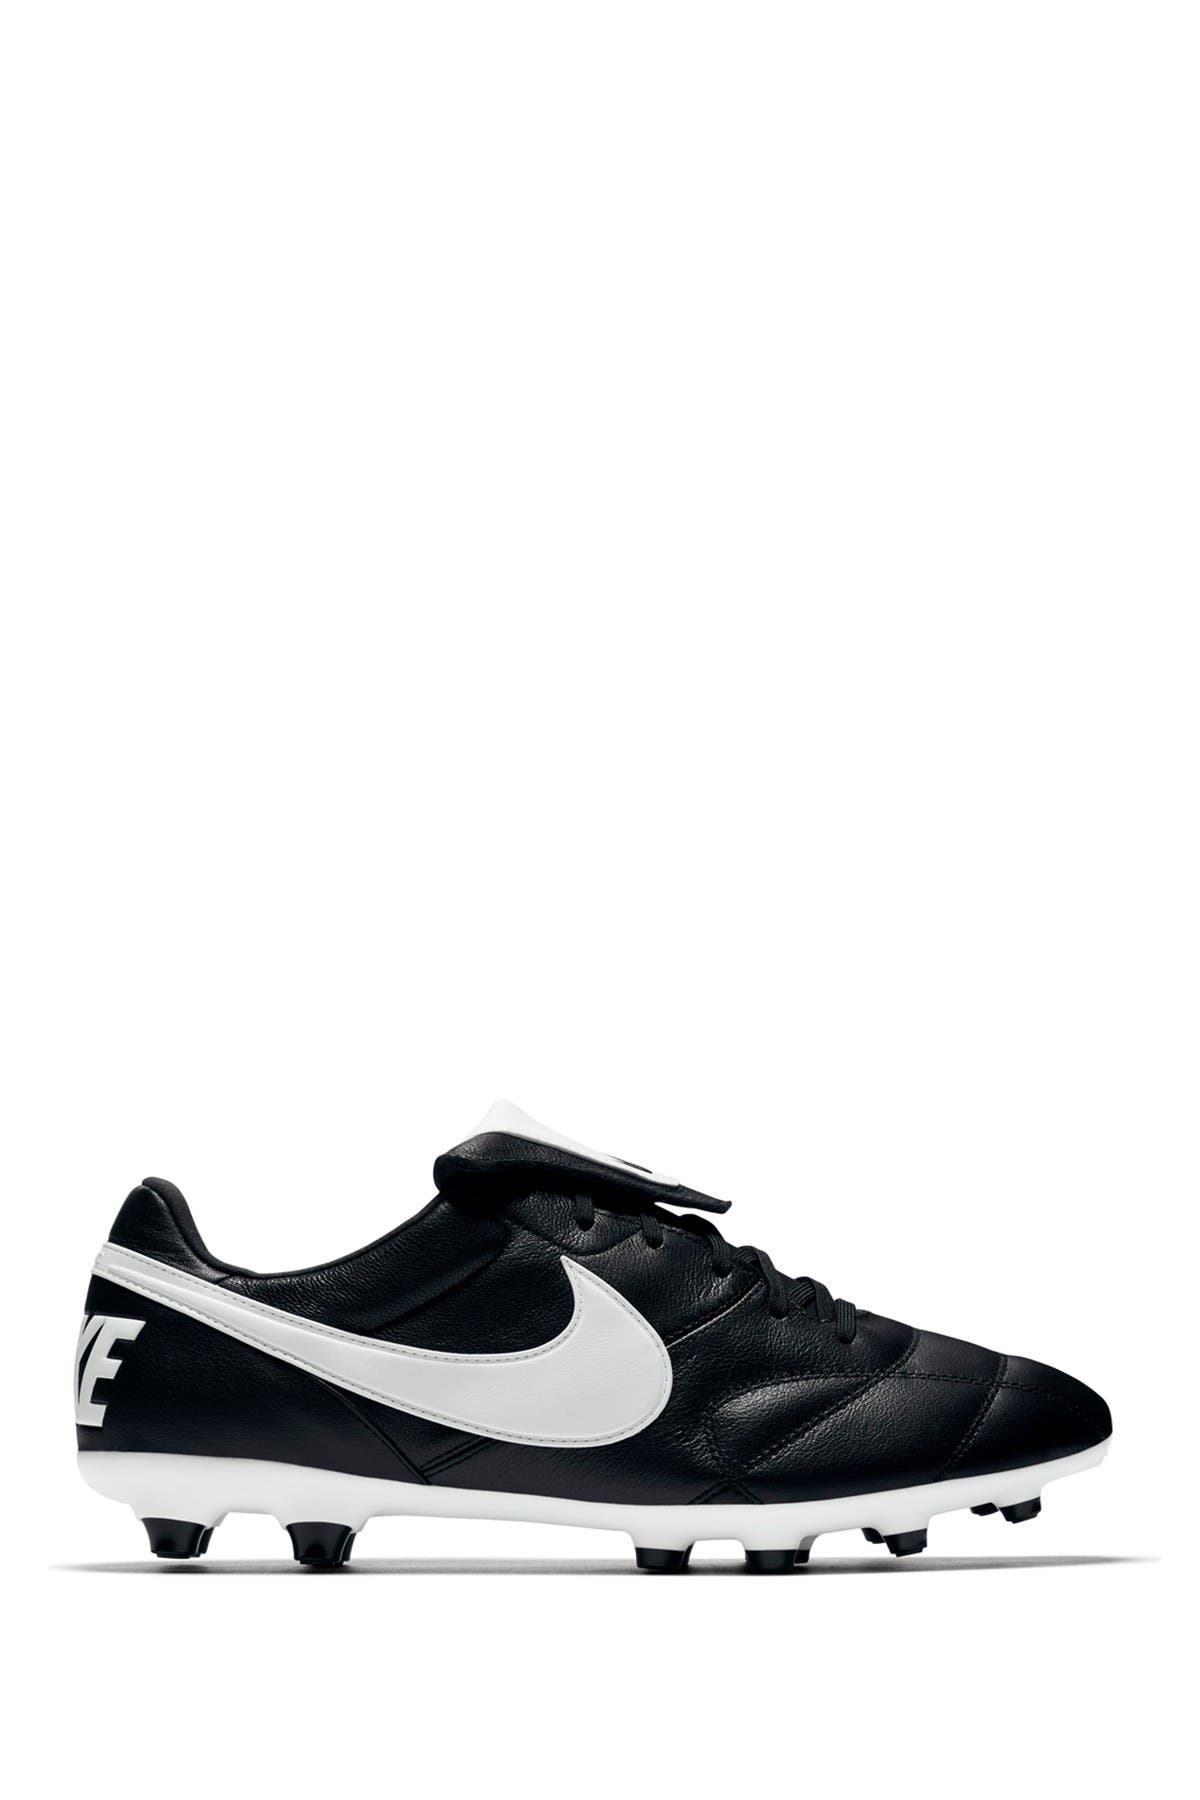 nike leather cleats soccer